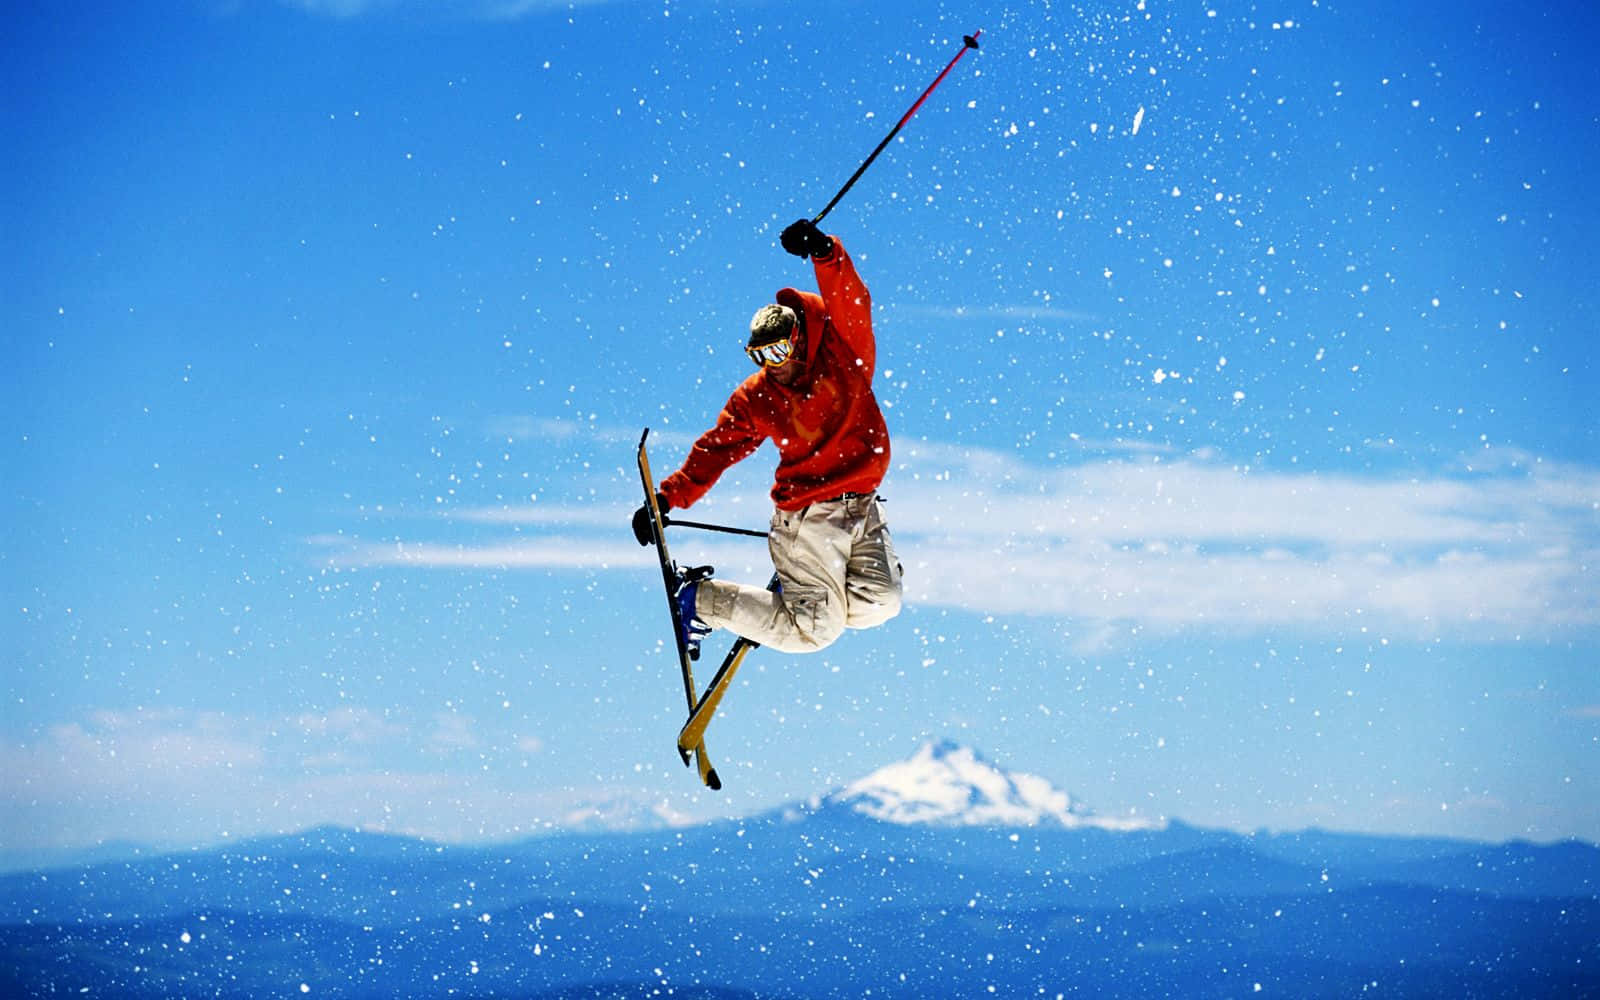 Surreal Skiing Adventure In Snow-covered Mountains Wallpaper